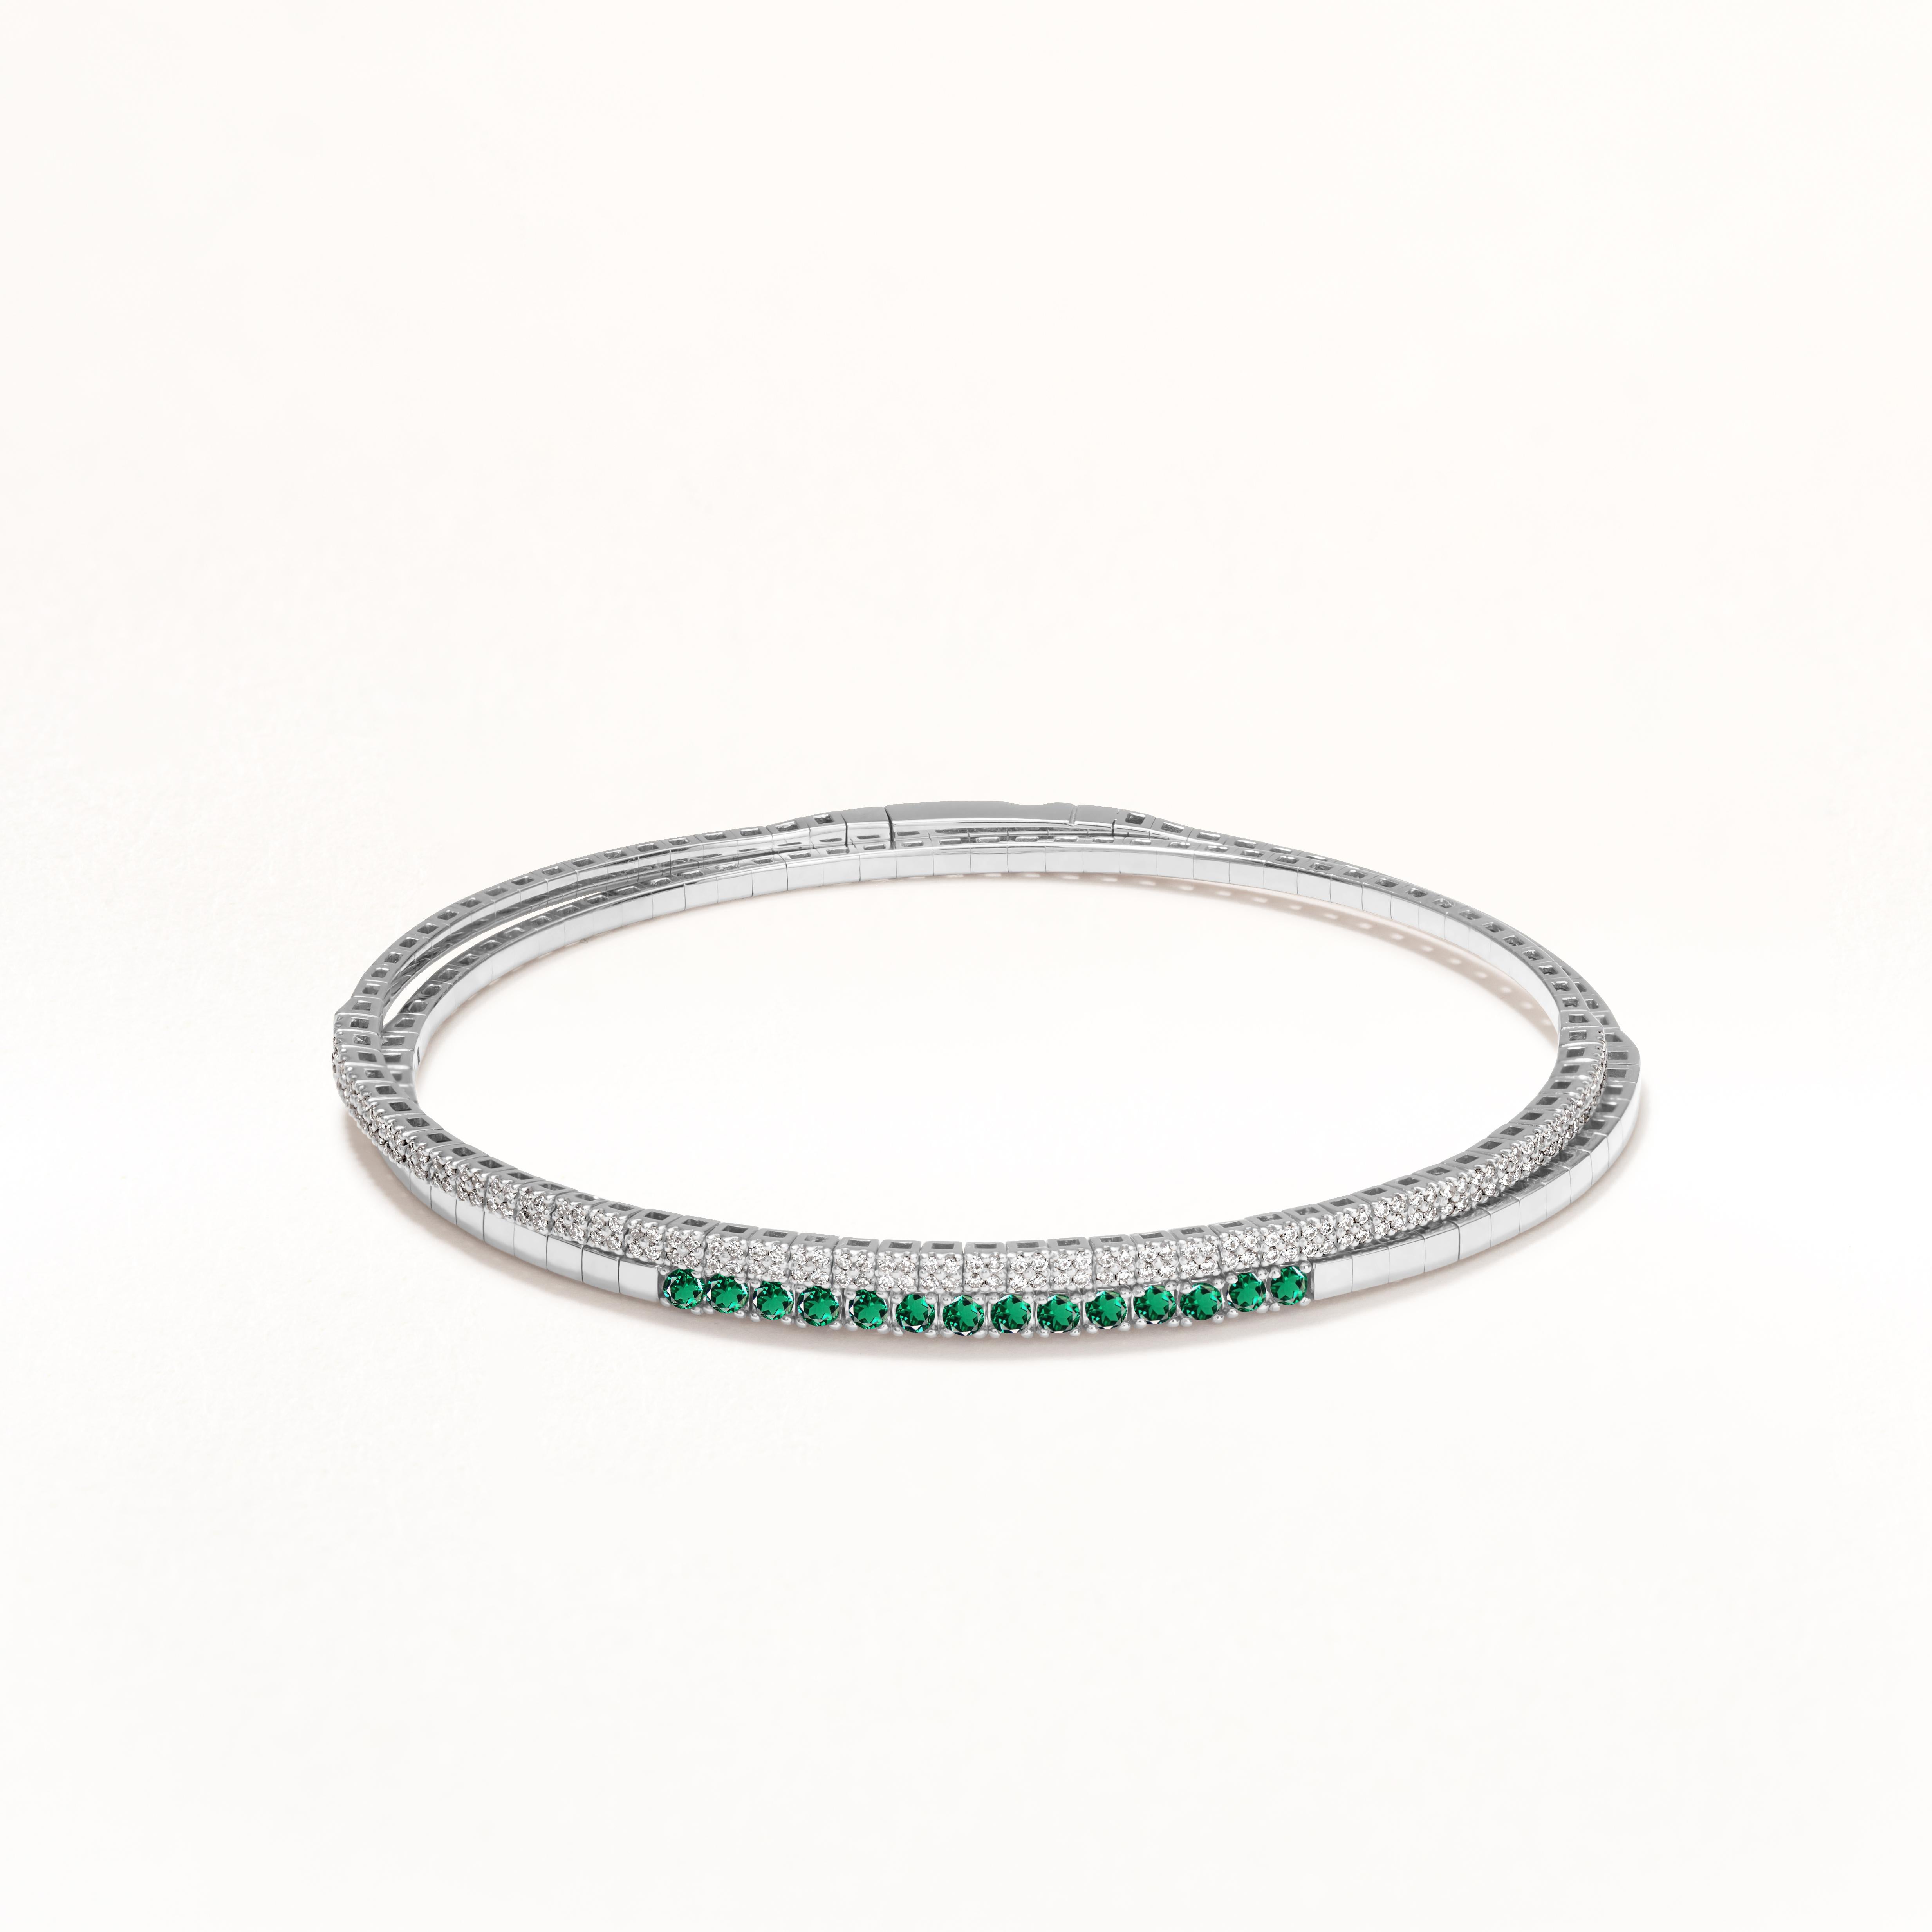 Elegant and feminine! Gemistry created this gorgeous rolling bangle bracelet set in 18K white gold with 176 round-full cut white diamonds and 14 round-cut emeralds arranged in graceful patterns, making it the ideal choice for your party outfits. The